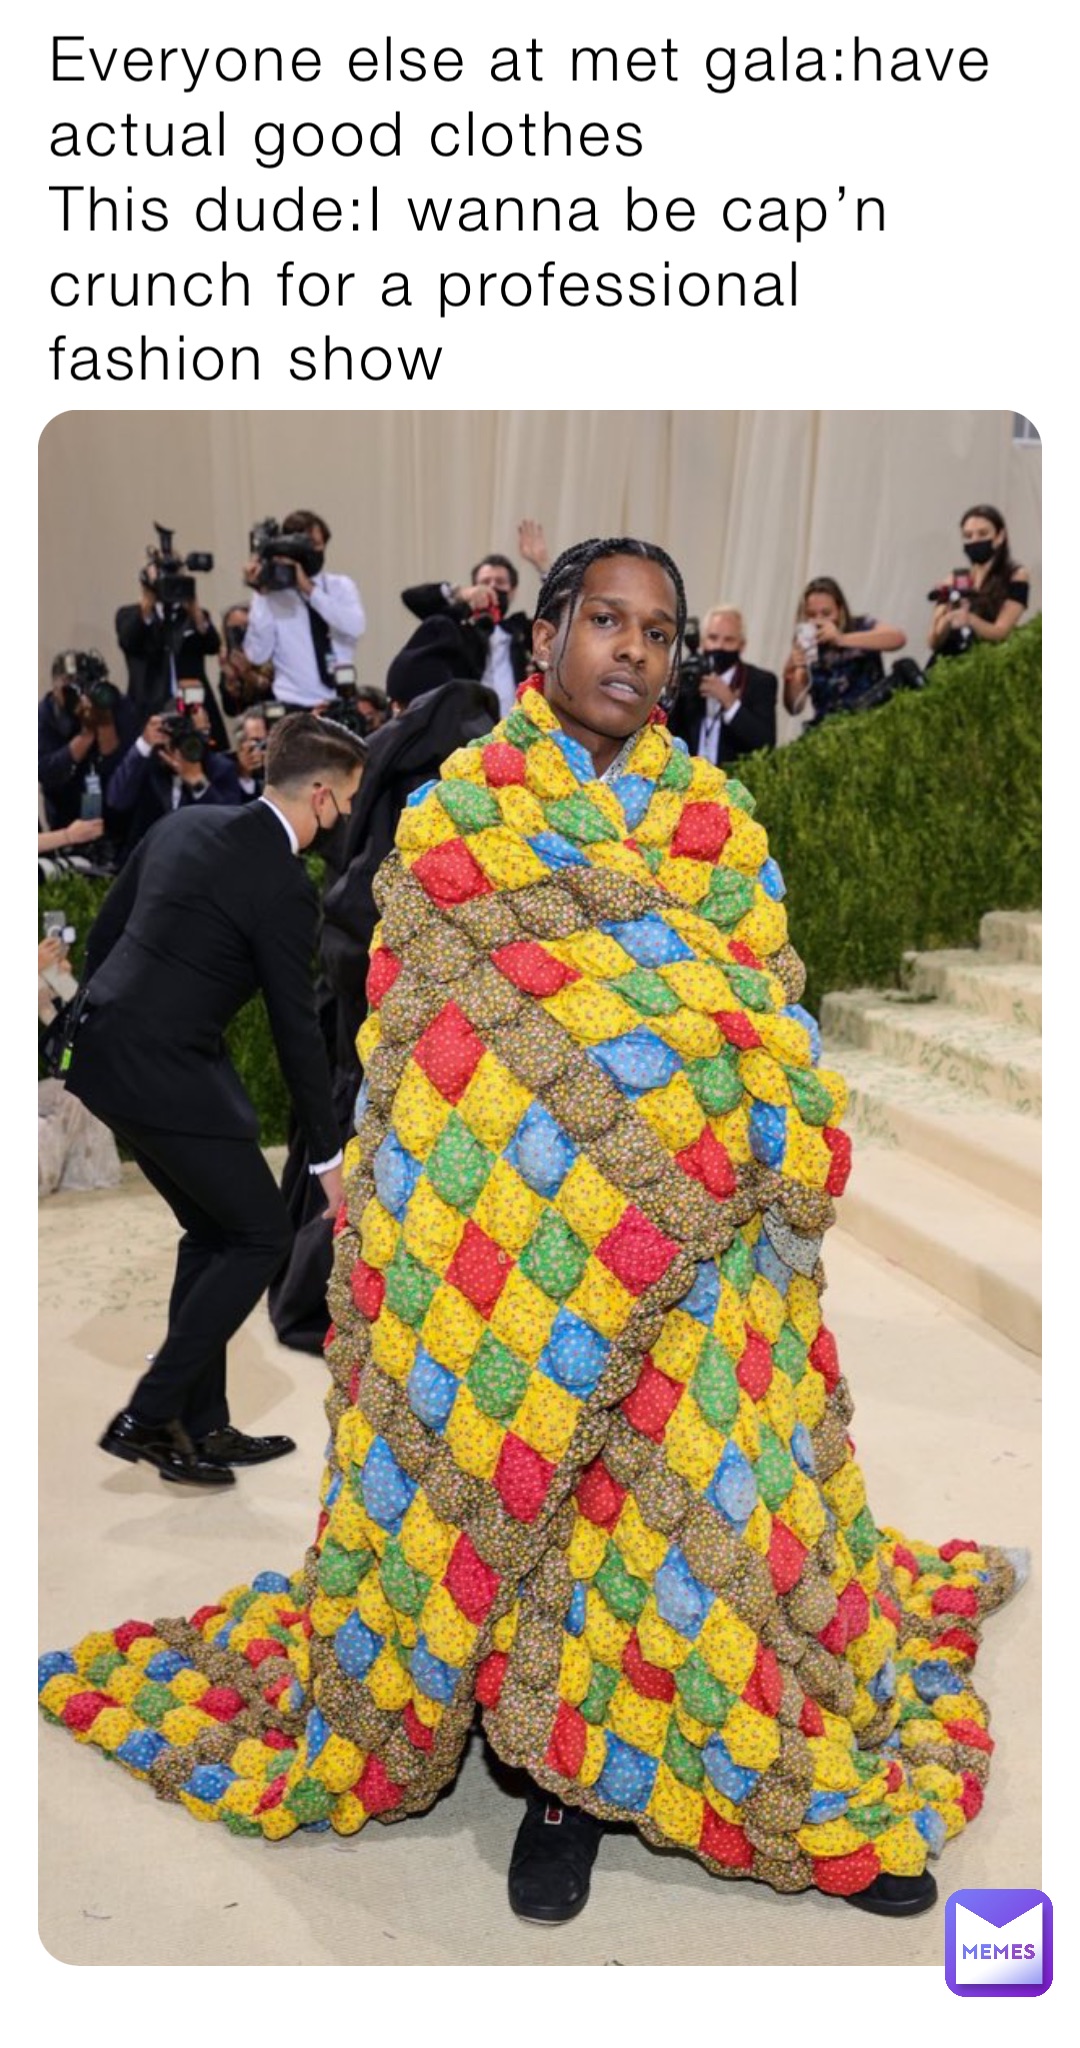 Everyone else at met gala:have actual good clothes
This dude:I wanna be cap’n crunch for a professional fashion show